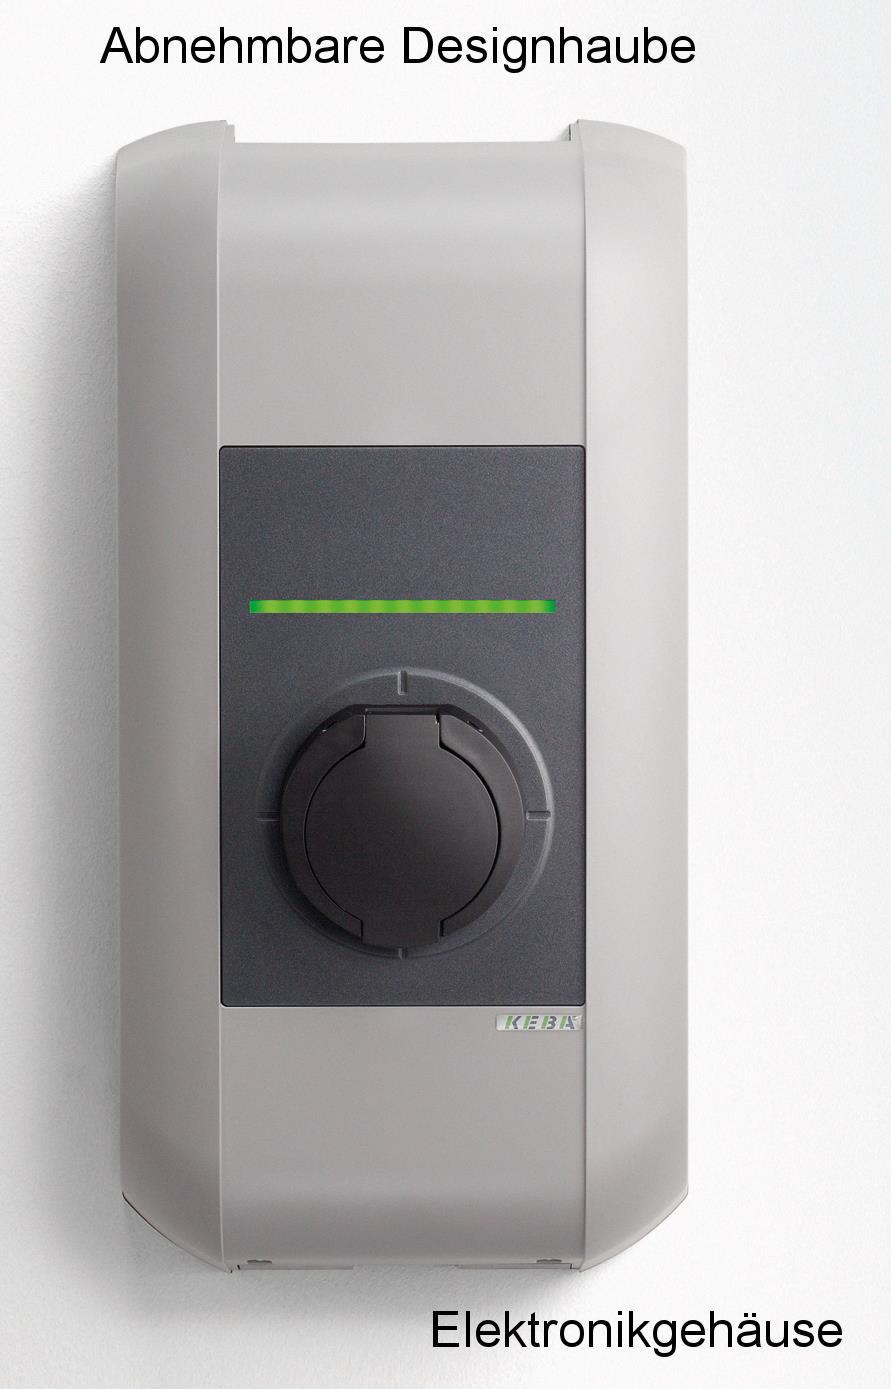 1.9 Can the charging procedure be controlled by external devices? Yes. The KeContact P20 has a connection for enabling charging by external devices (e.g. ripple control receivers of the energy supplier, photovoltaic systems, time switches, home controllers and similar).